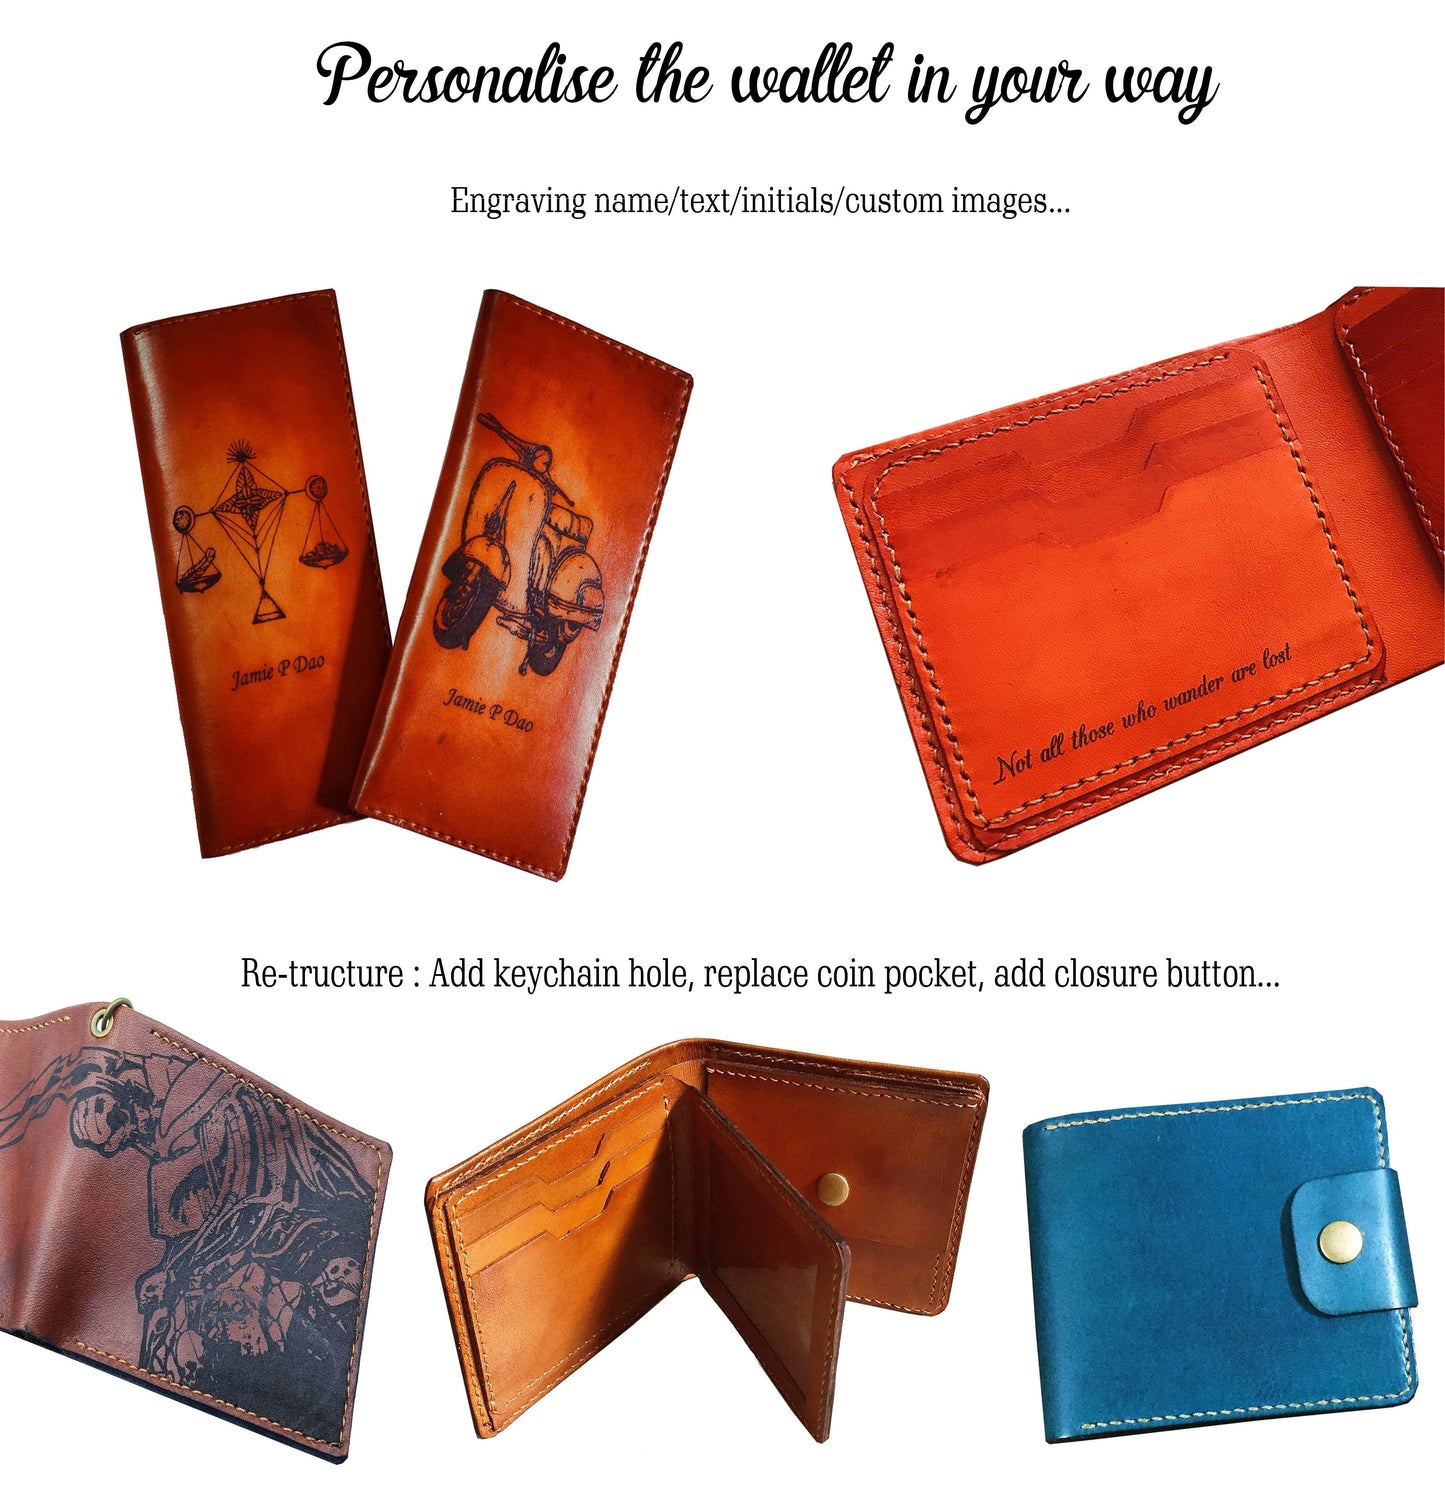 Mayan Corner - Classic Godzilla painting leather wallet, customized wallet for him, christmas leather present ideas for men